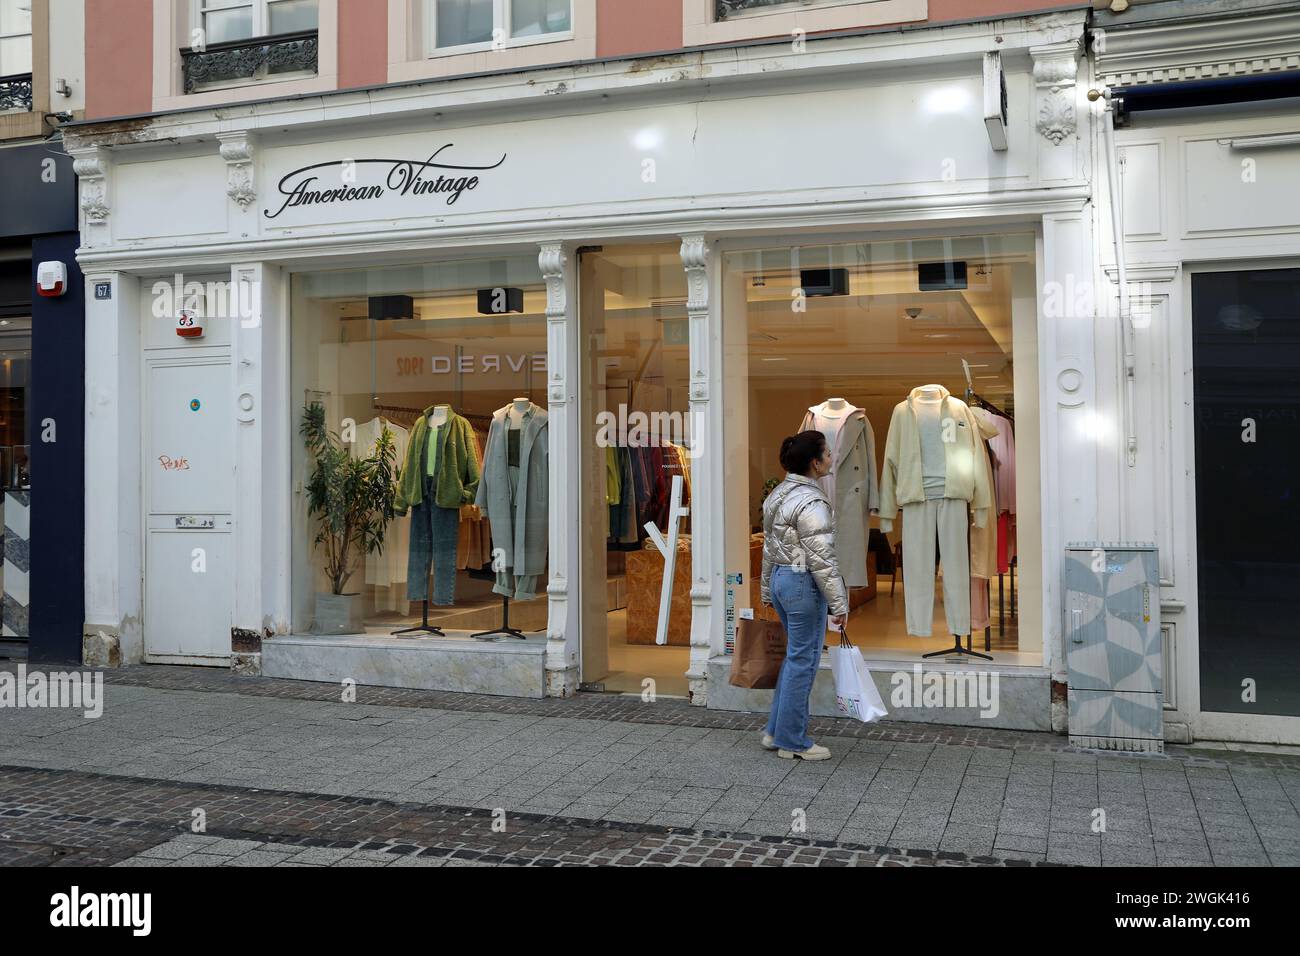 American Vintage store in Luxembourg City Stock Photo